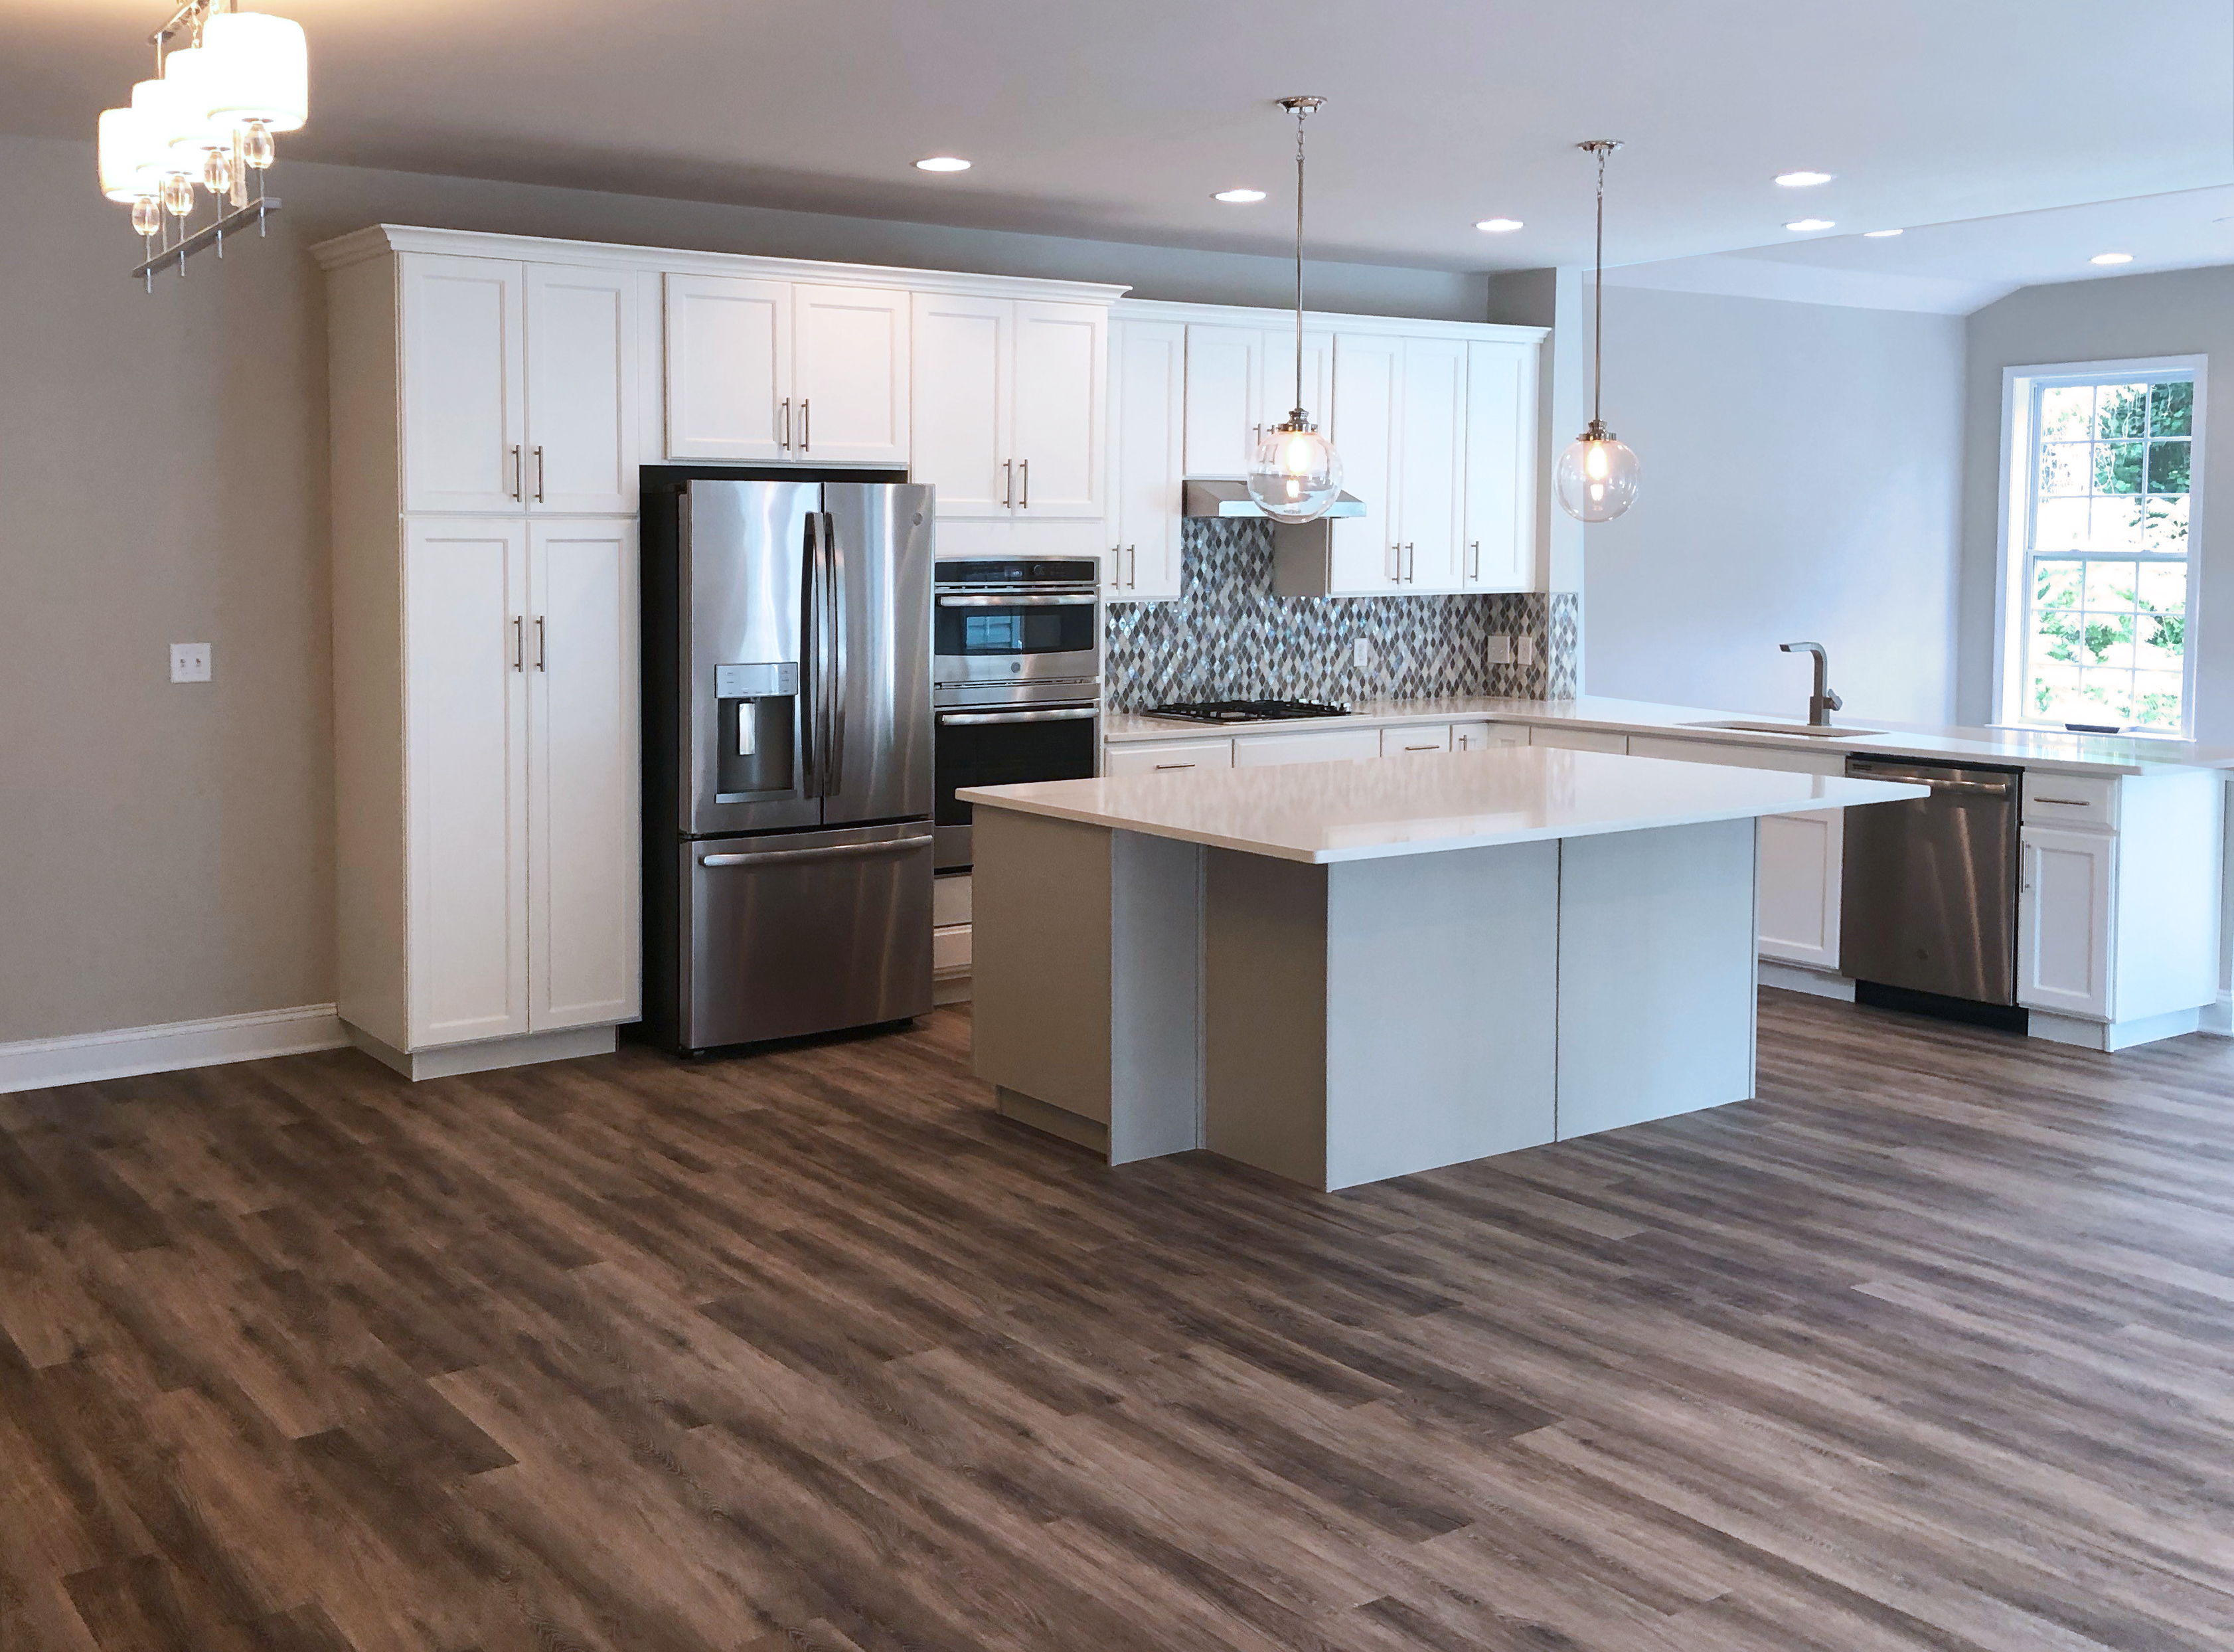 A Guide to Kitchen Flooring Materials- Wood, Tile and Everything in Between